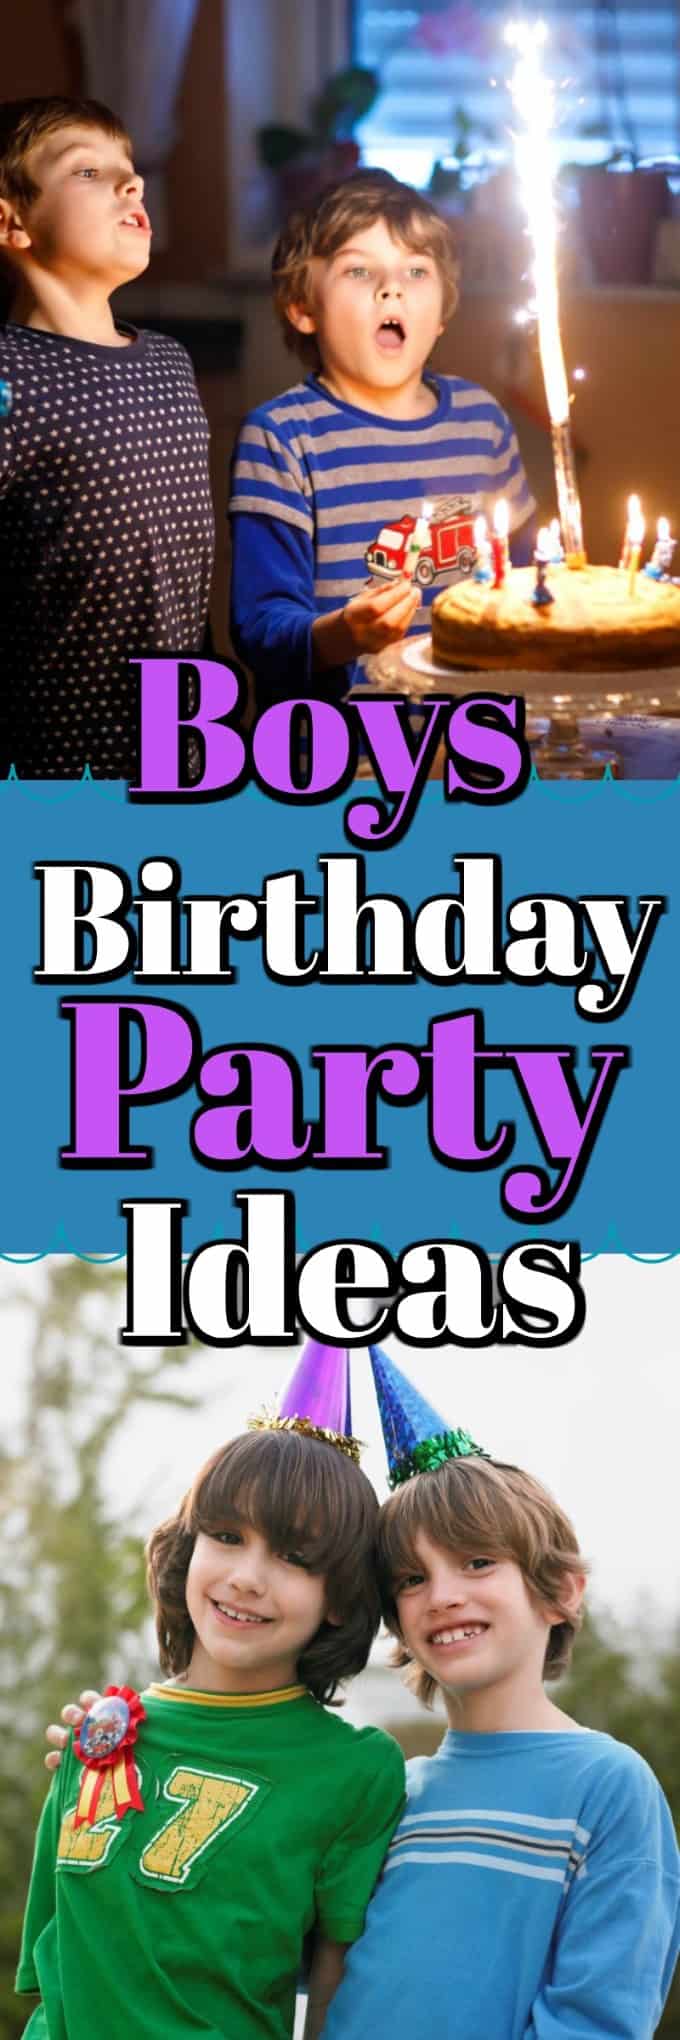 The birthday boy usually wants an action-packed birthday bash. Parents on the other hand, sometimes dread birthday parties because there is so much pressure. Let us help you! #birthdayparty #boysparty